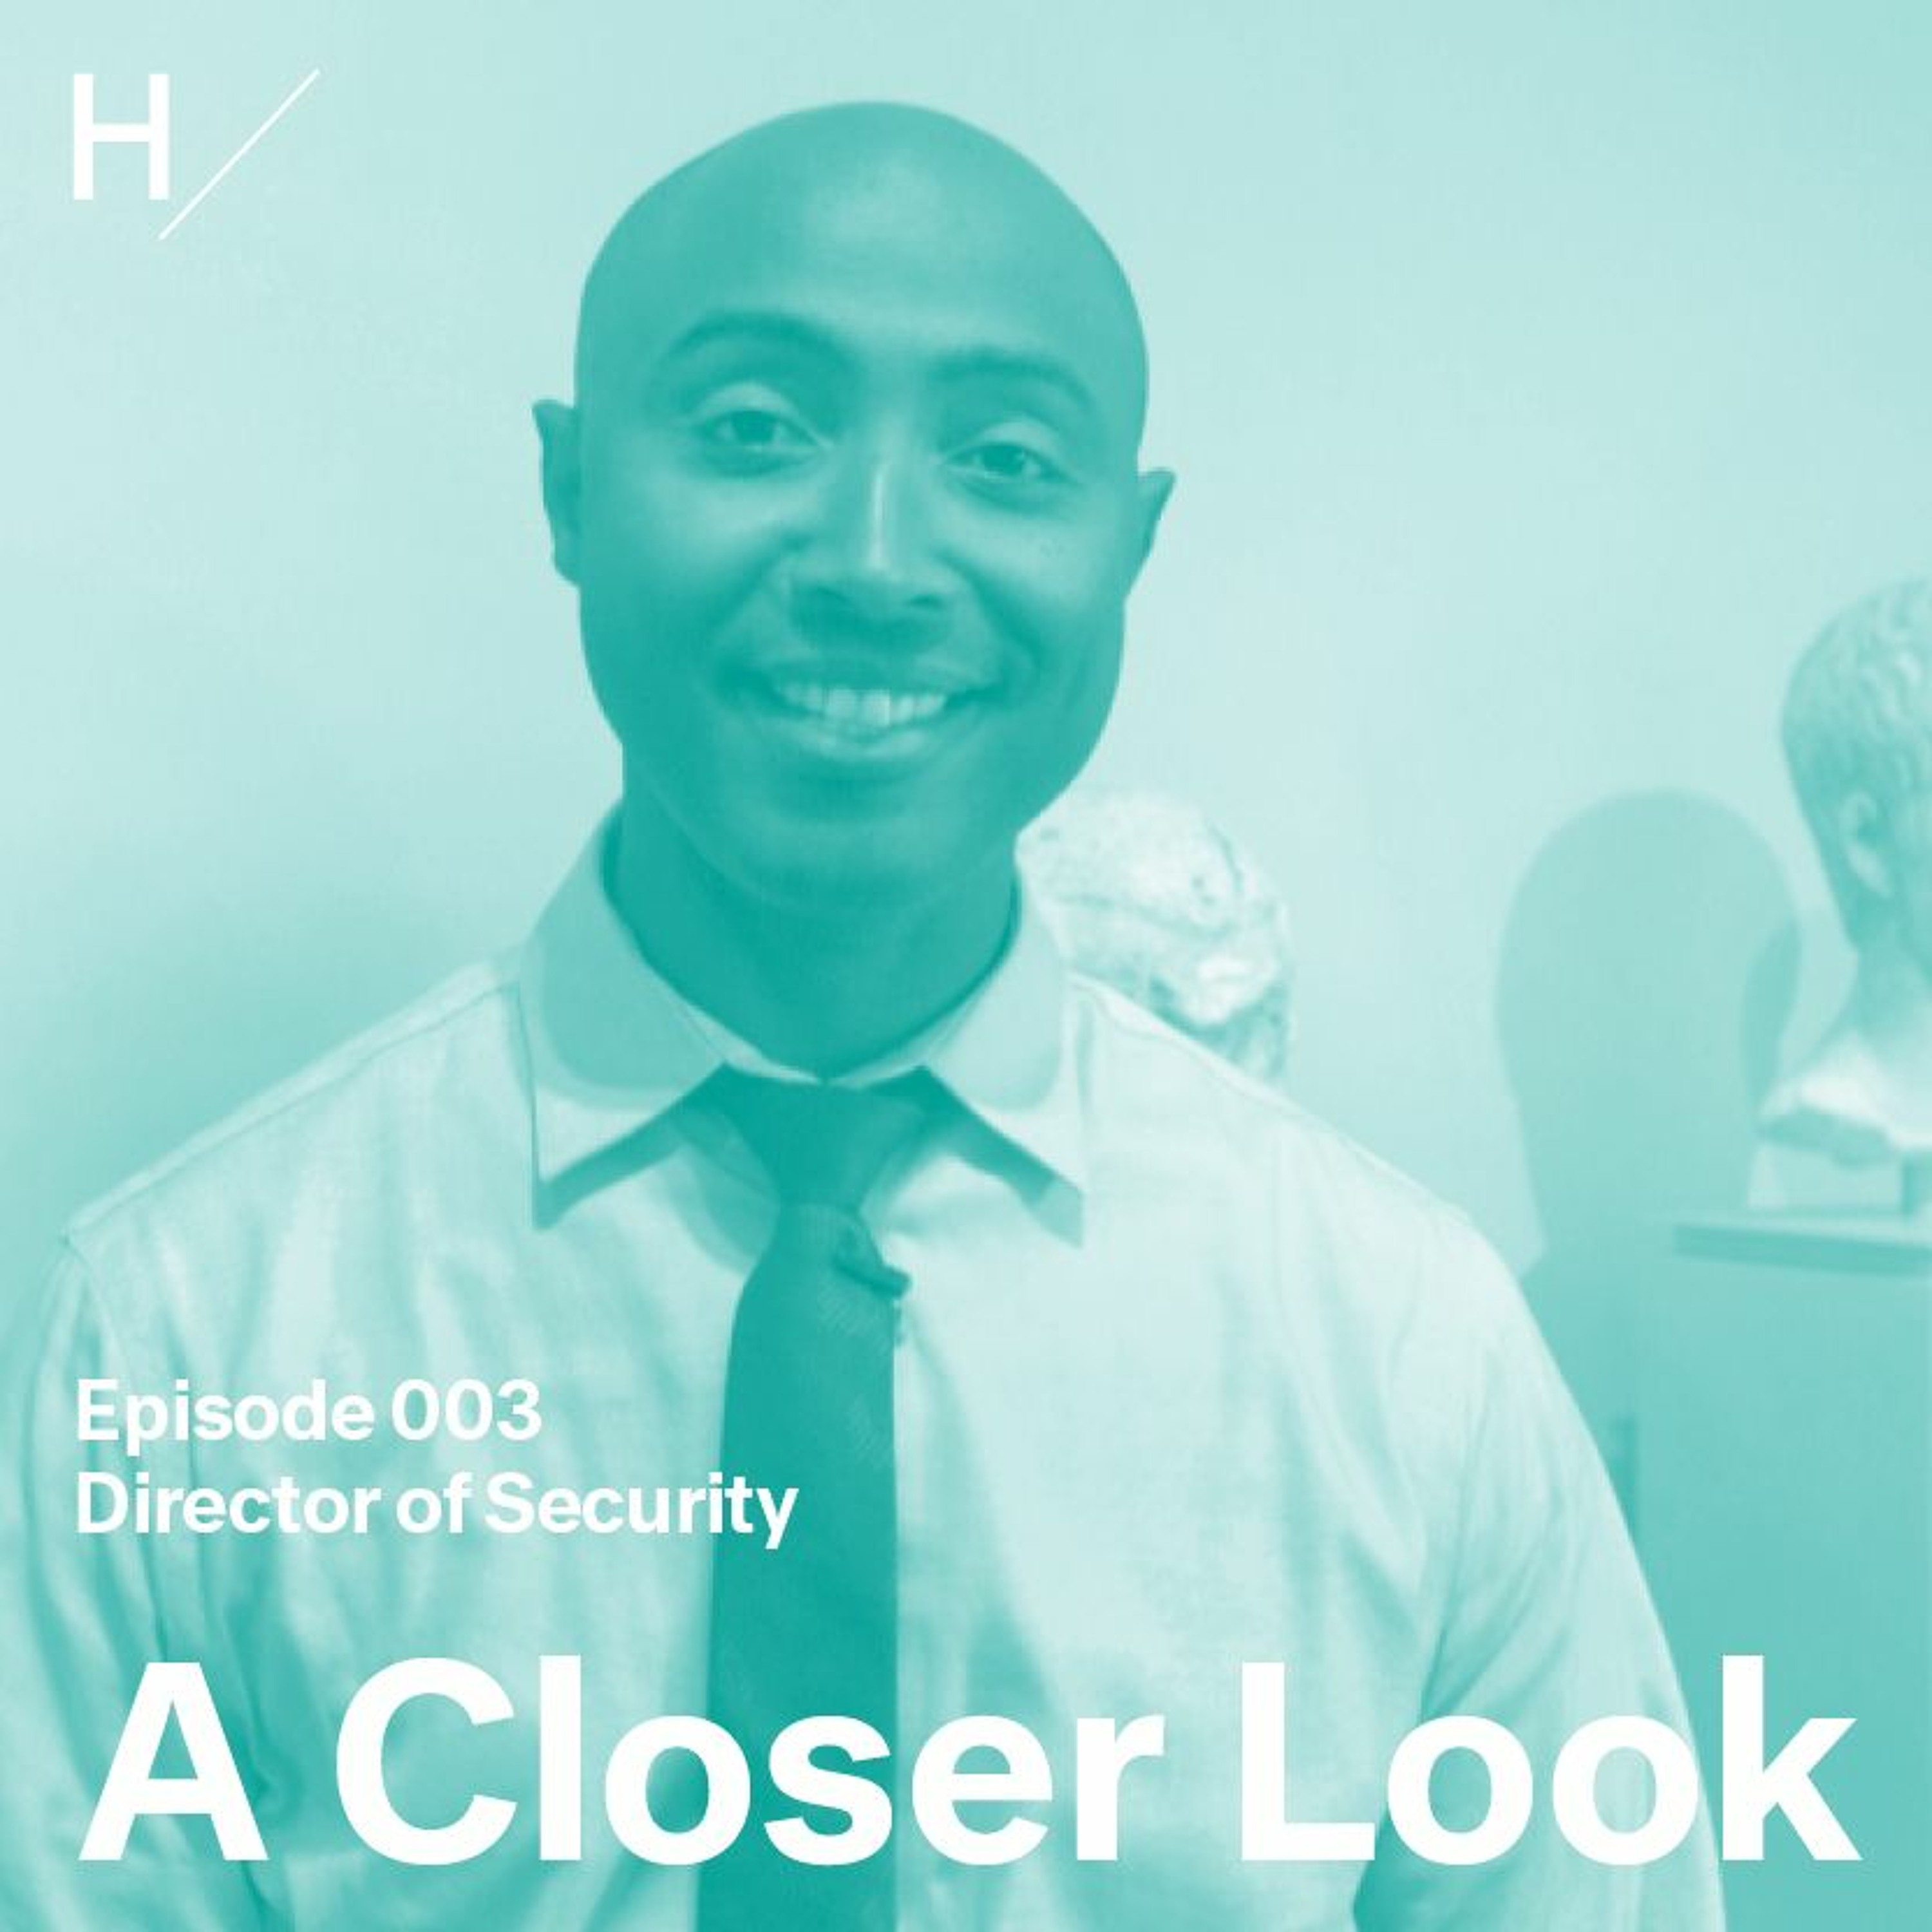 A Closer Look: Episode 3, The Director of Security